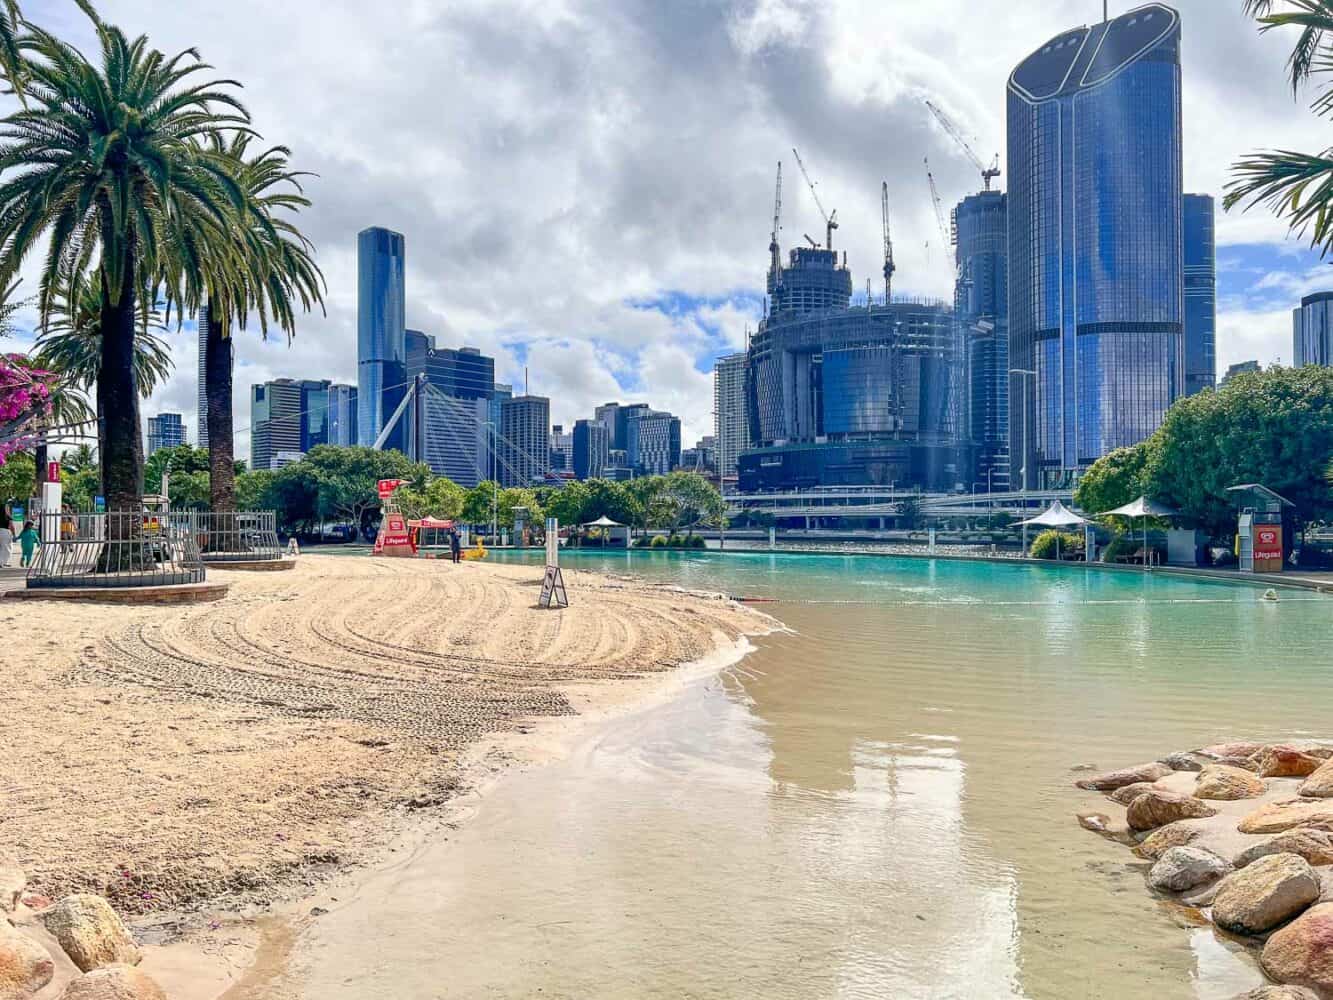 Unique Streets Beach with a shallow clear lagoon, palm trees and glistening skyscrapers, Brisbane, Australia